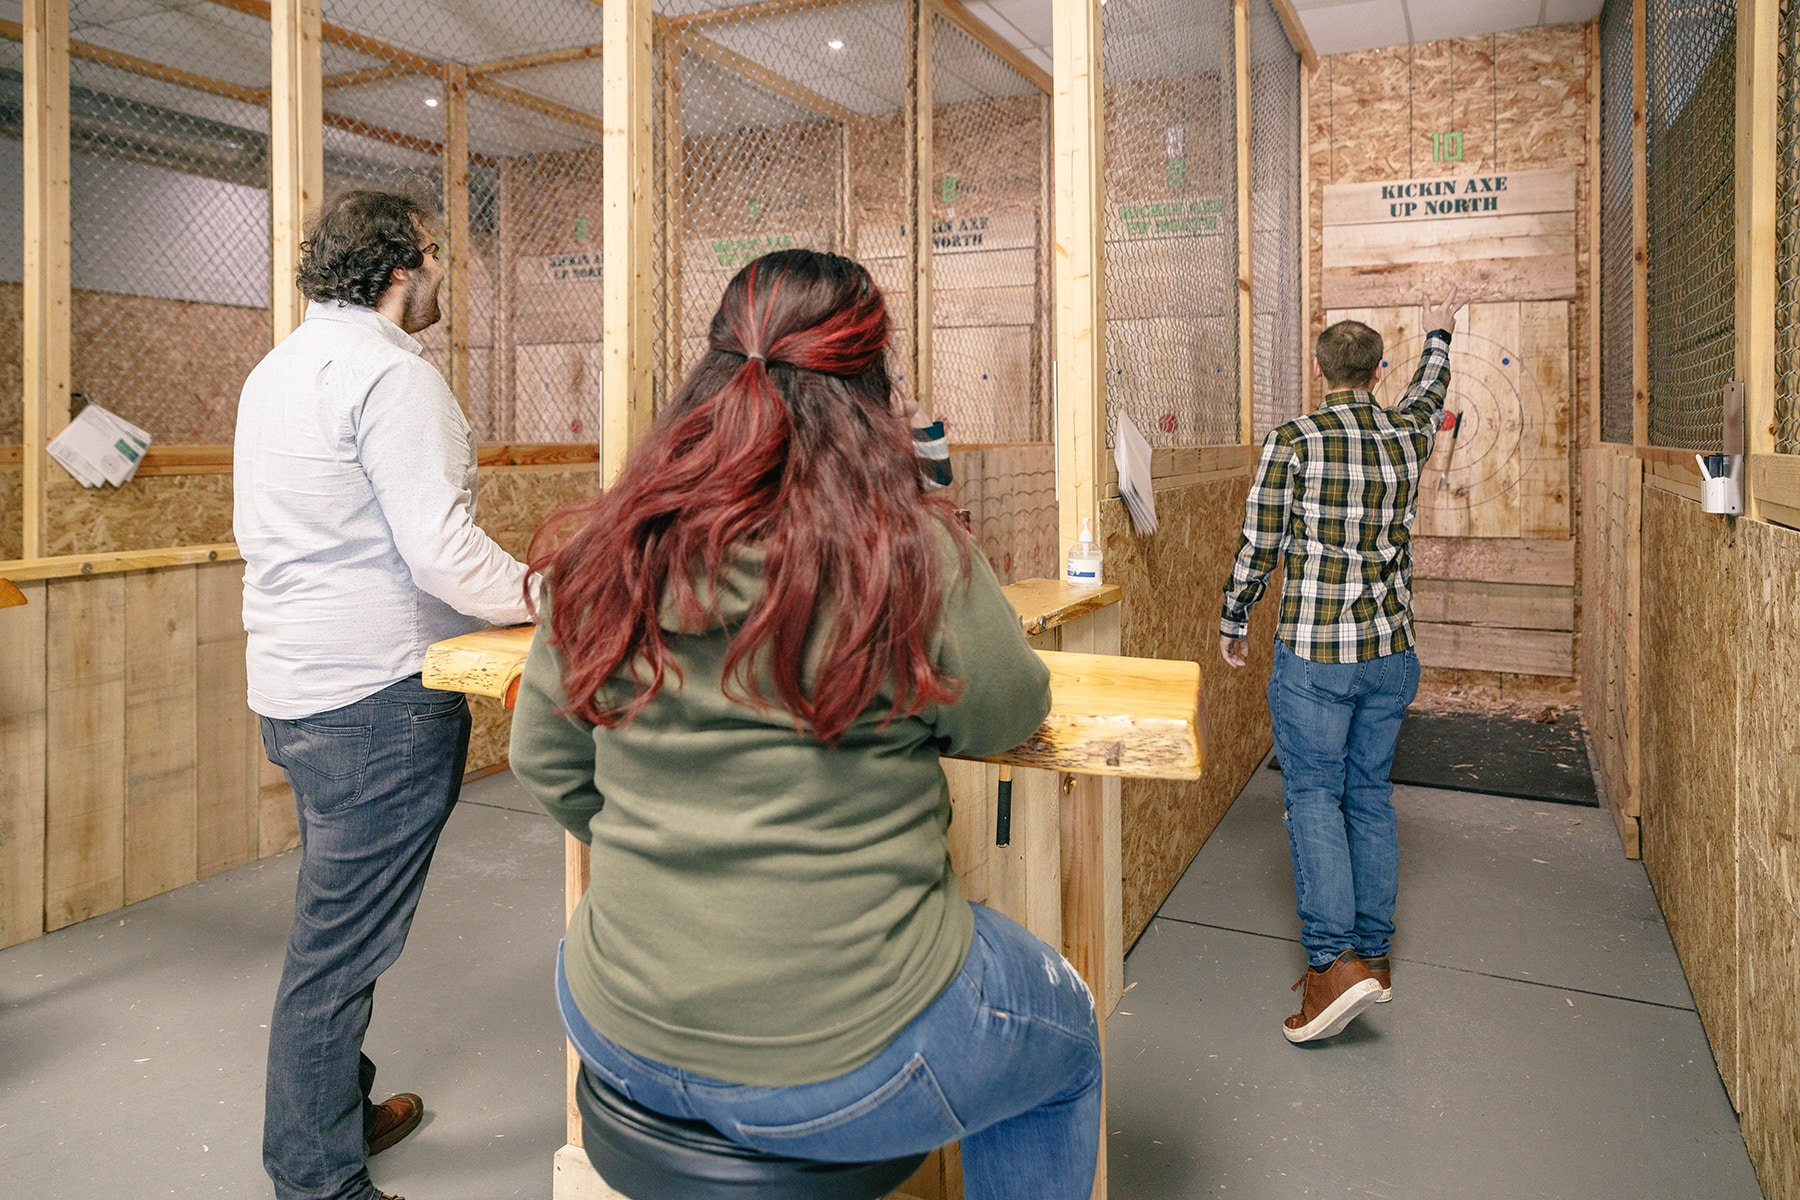 A group of people in a shooting range.